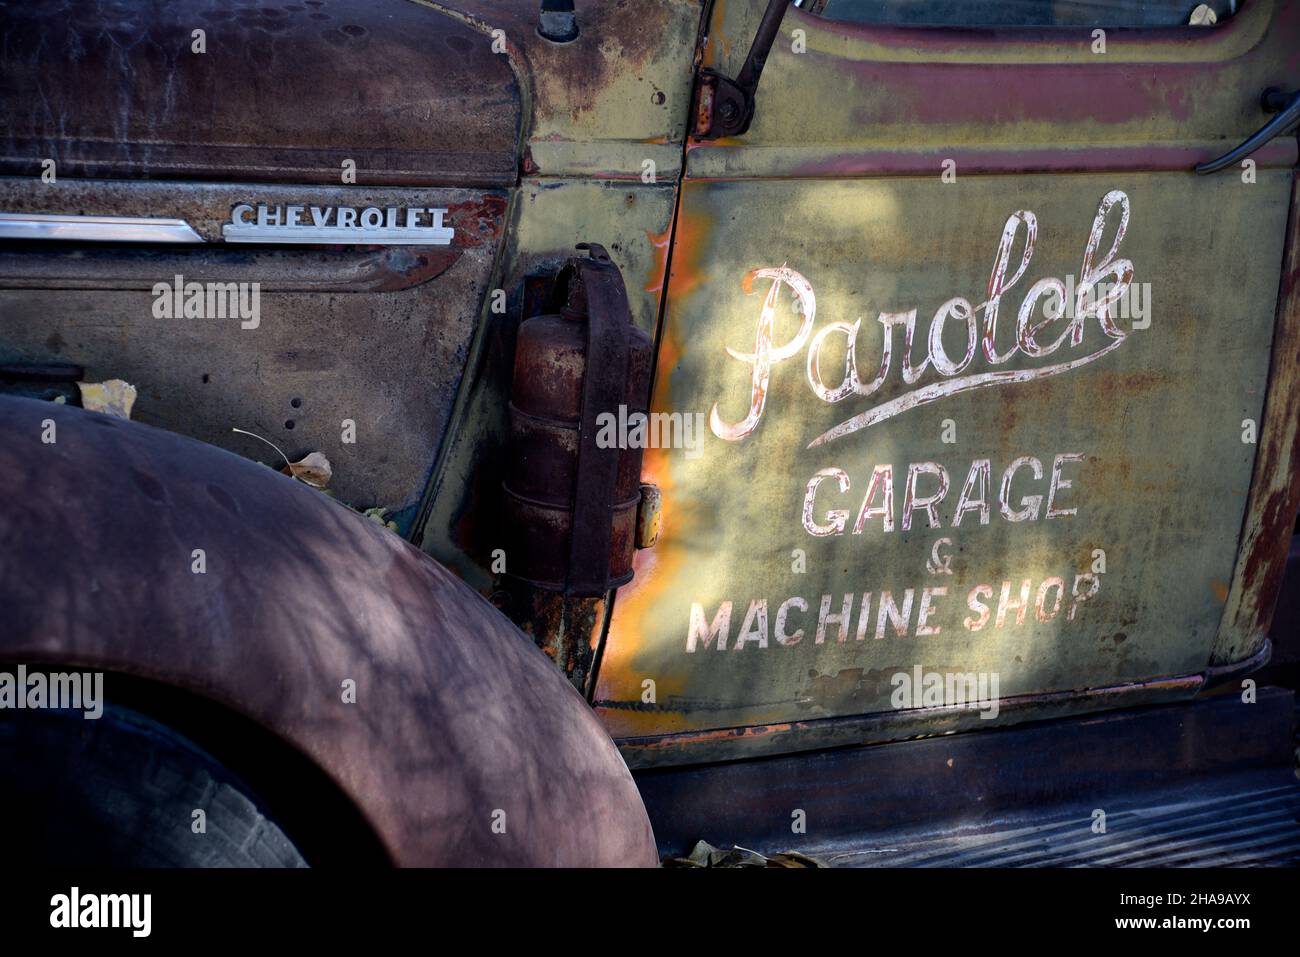 A vintage 1940s Chevrolet machine shop and garage truck retired from service and parked in Taos, New Mexico. Stock Photo